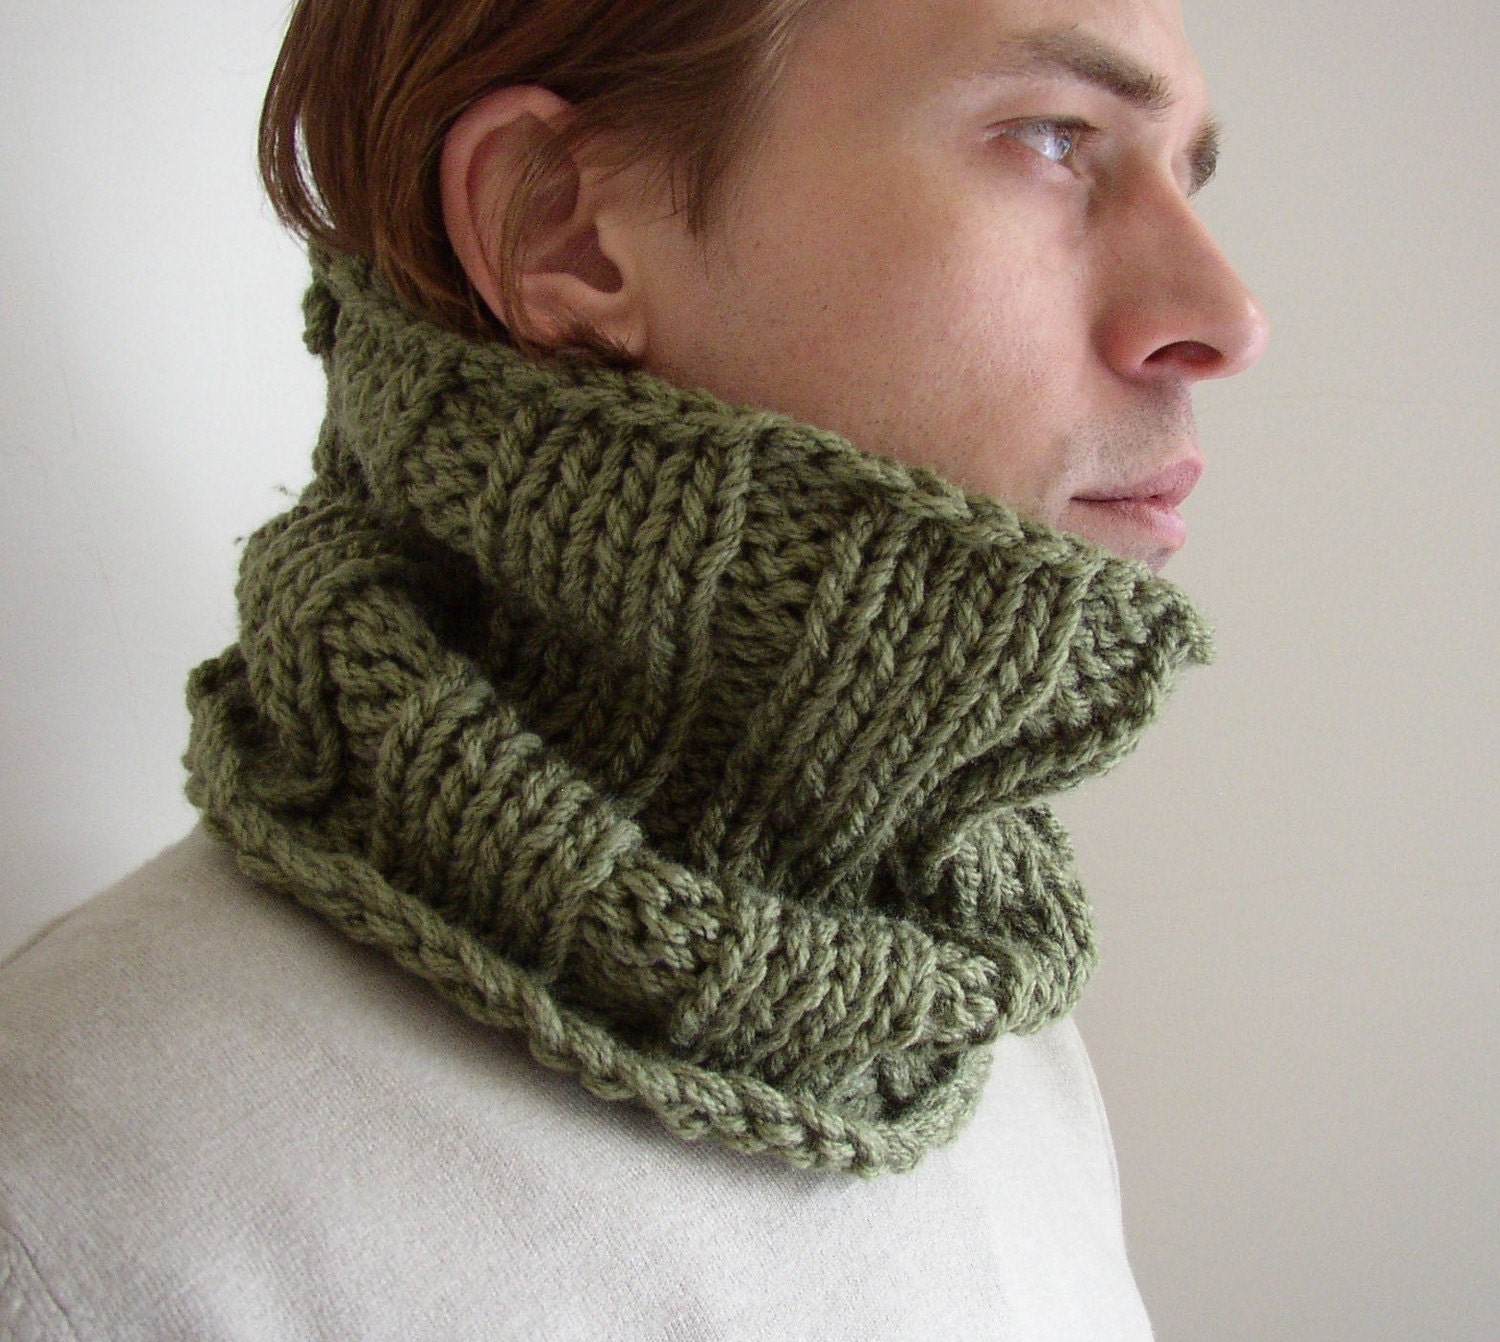 Olive Green Man cowl Mens Neckwarmer READY TO SHIP